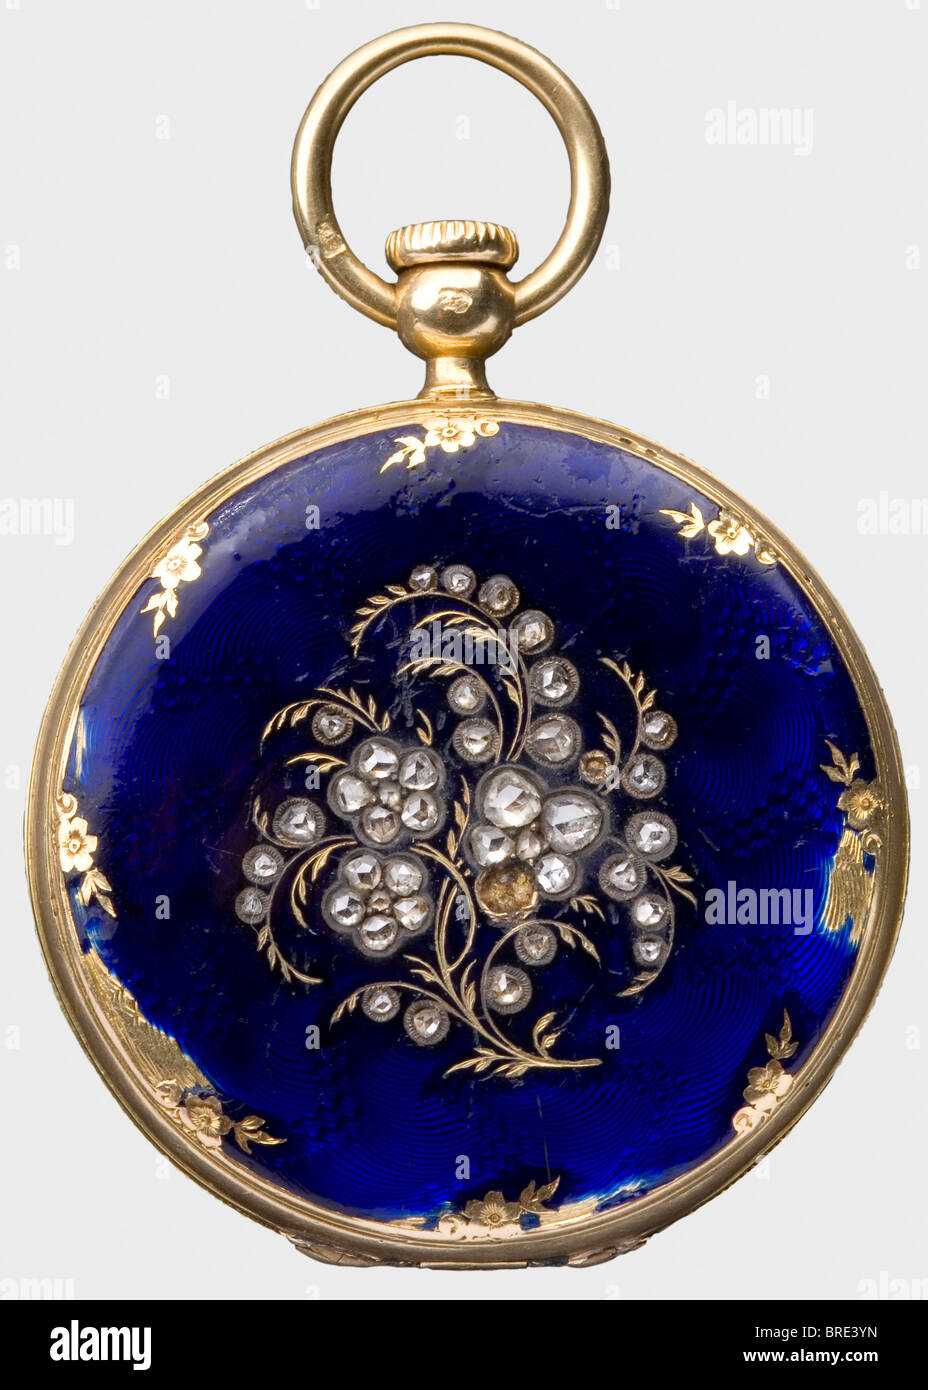 A personal Patek Philippe savonette, displaying the Madonna of Ostrabrama, 1850/52 Case and factory number '4422'. 18-carat gold with dark blue enamel on a wavy guilloche background. 38 diamonds, in Old European cut (three missing), in the shape of a floral bouquet on the front cover (marks of wear), and with six diamonds, in Old European cut (one missing) on the back cover in a star pattern. Signed, 'Patek Philippe & Co à Genève' inside the front lid. White enamel dial with Roman numerals and blued-steel Breguet hands. Functional, flat cylinder works with blue, Stock Photo